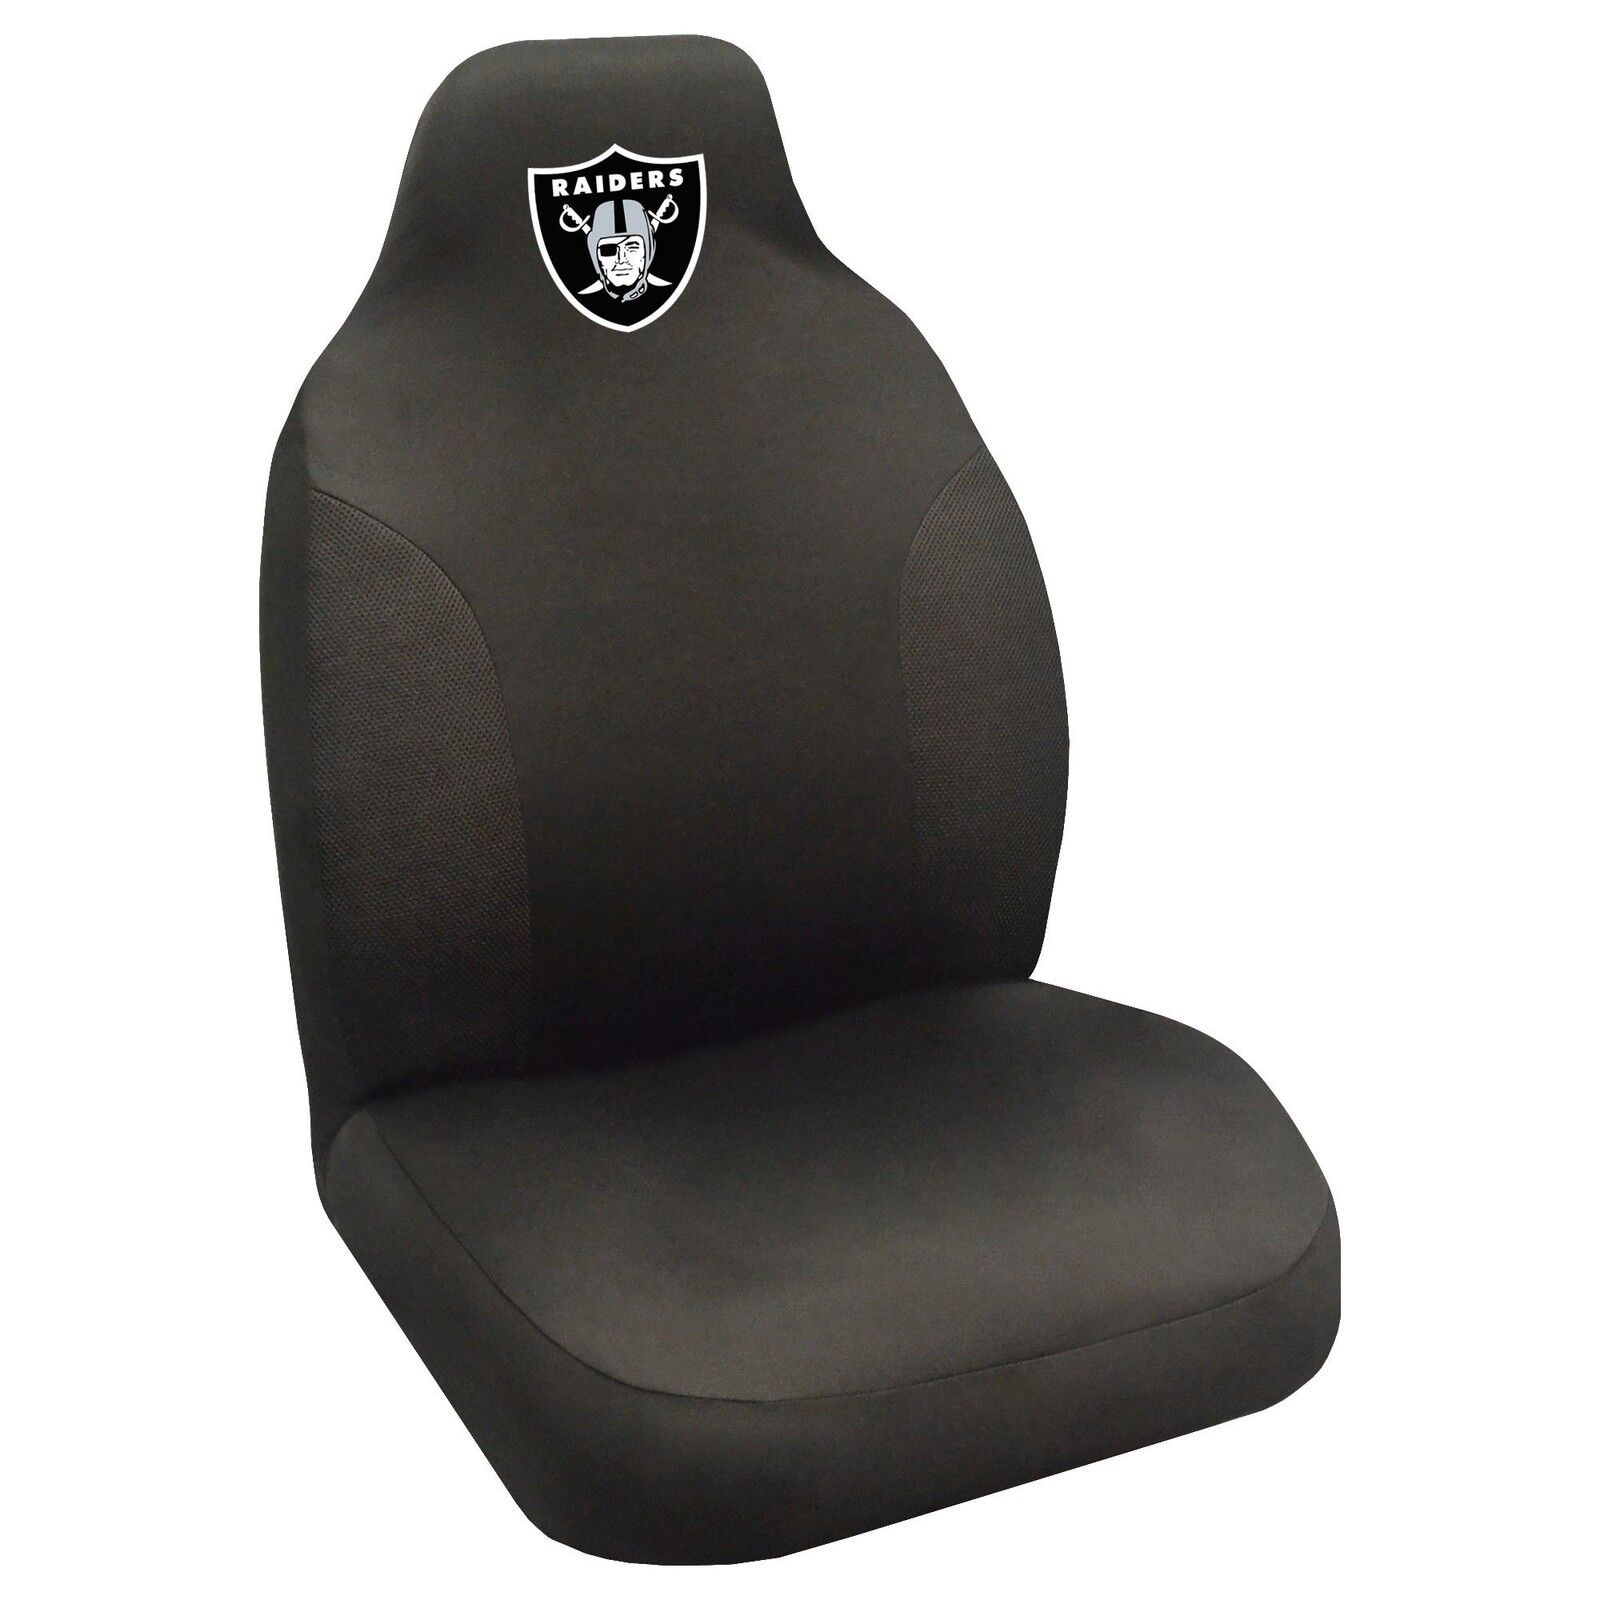 New NFL Oakland Raiders Car Truck Front Seat Cover - Official Licensed